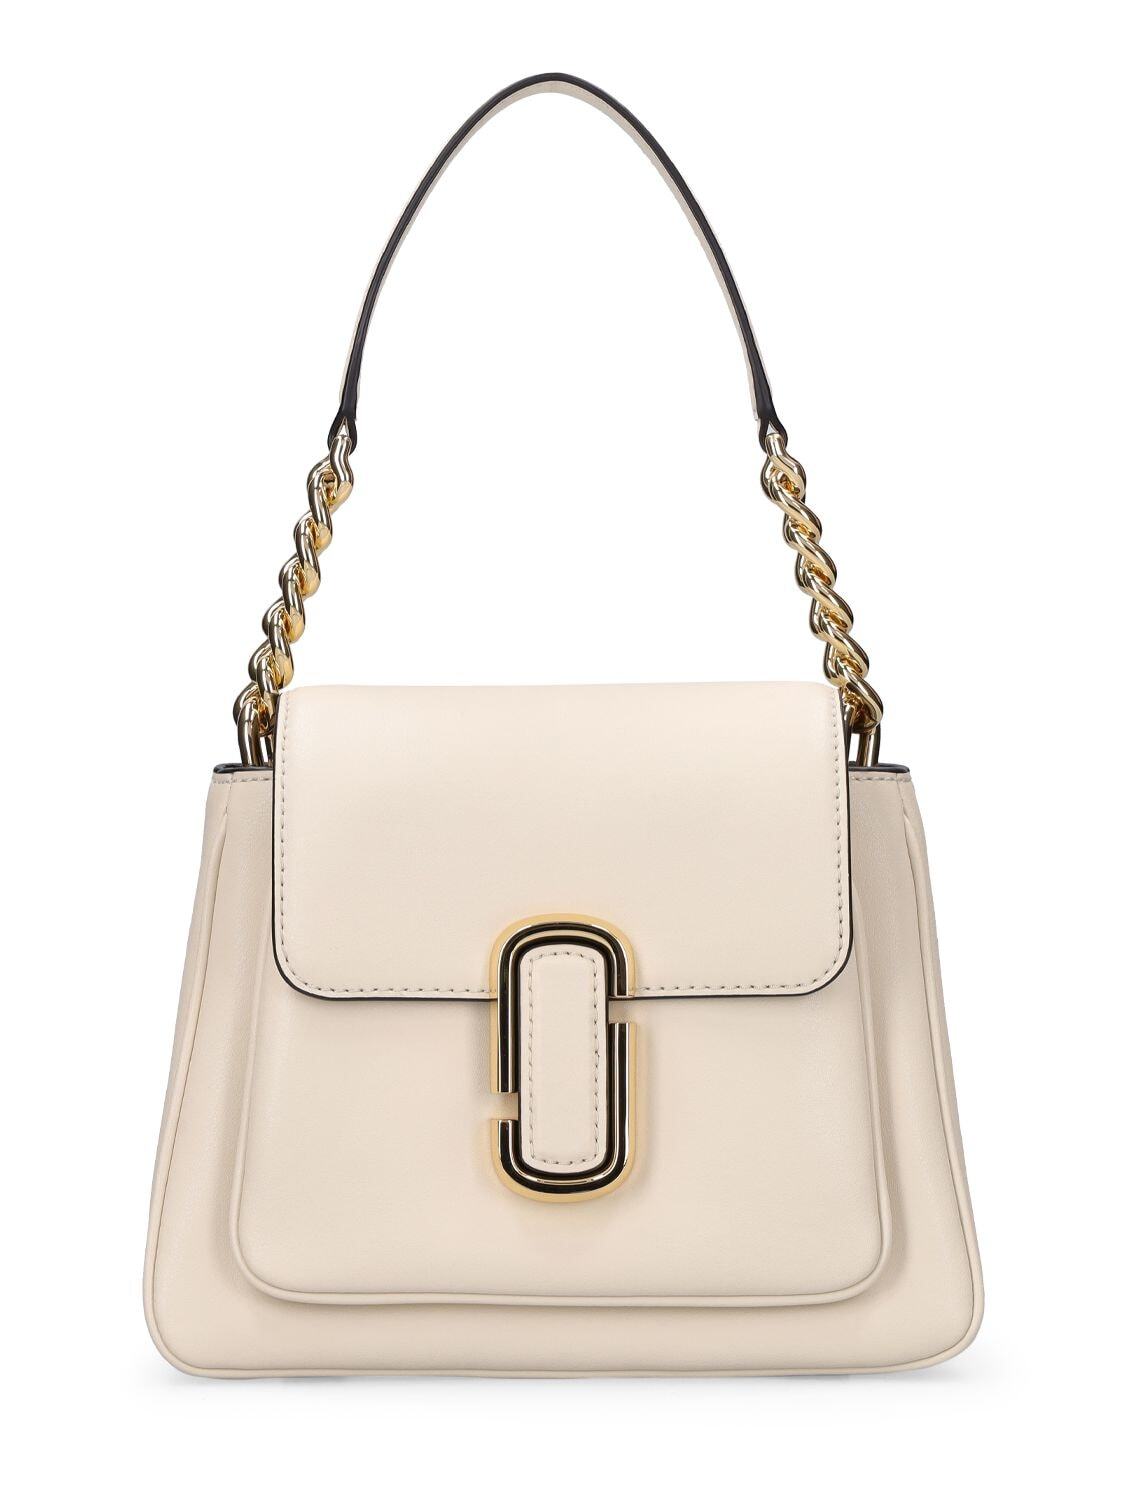 MARC JACOBS (THE) The Mini Satchel Leather Shoulder Bag in white